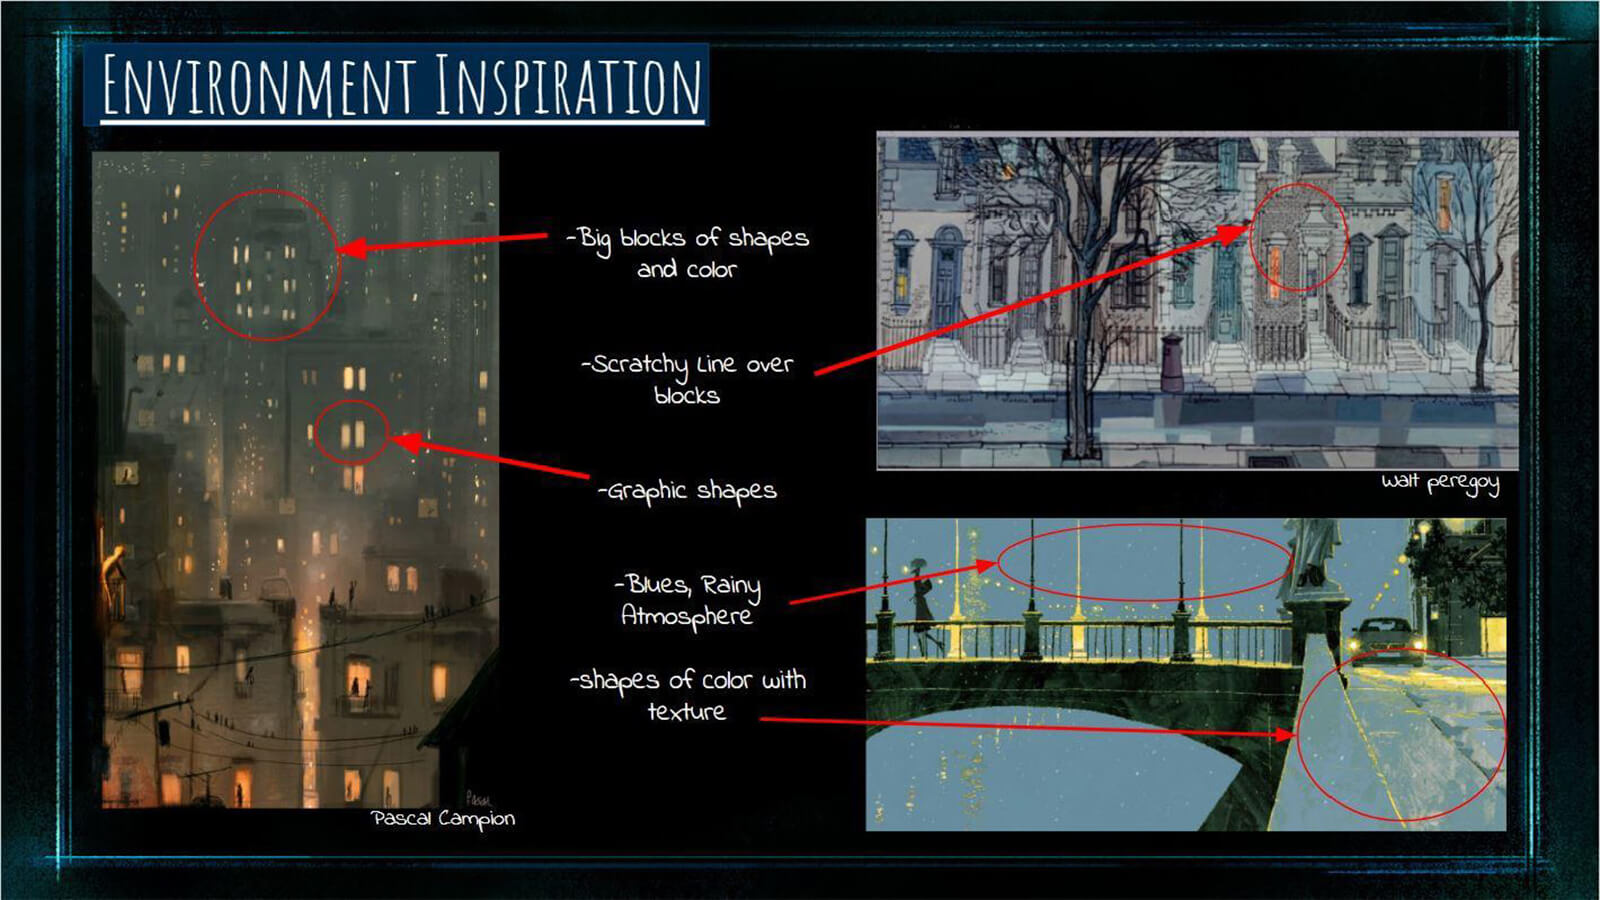 An "Environment Inspiration" slide, showing real world photos of urban locales that inspired the film's environments.